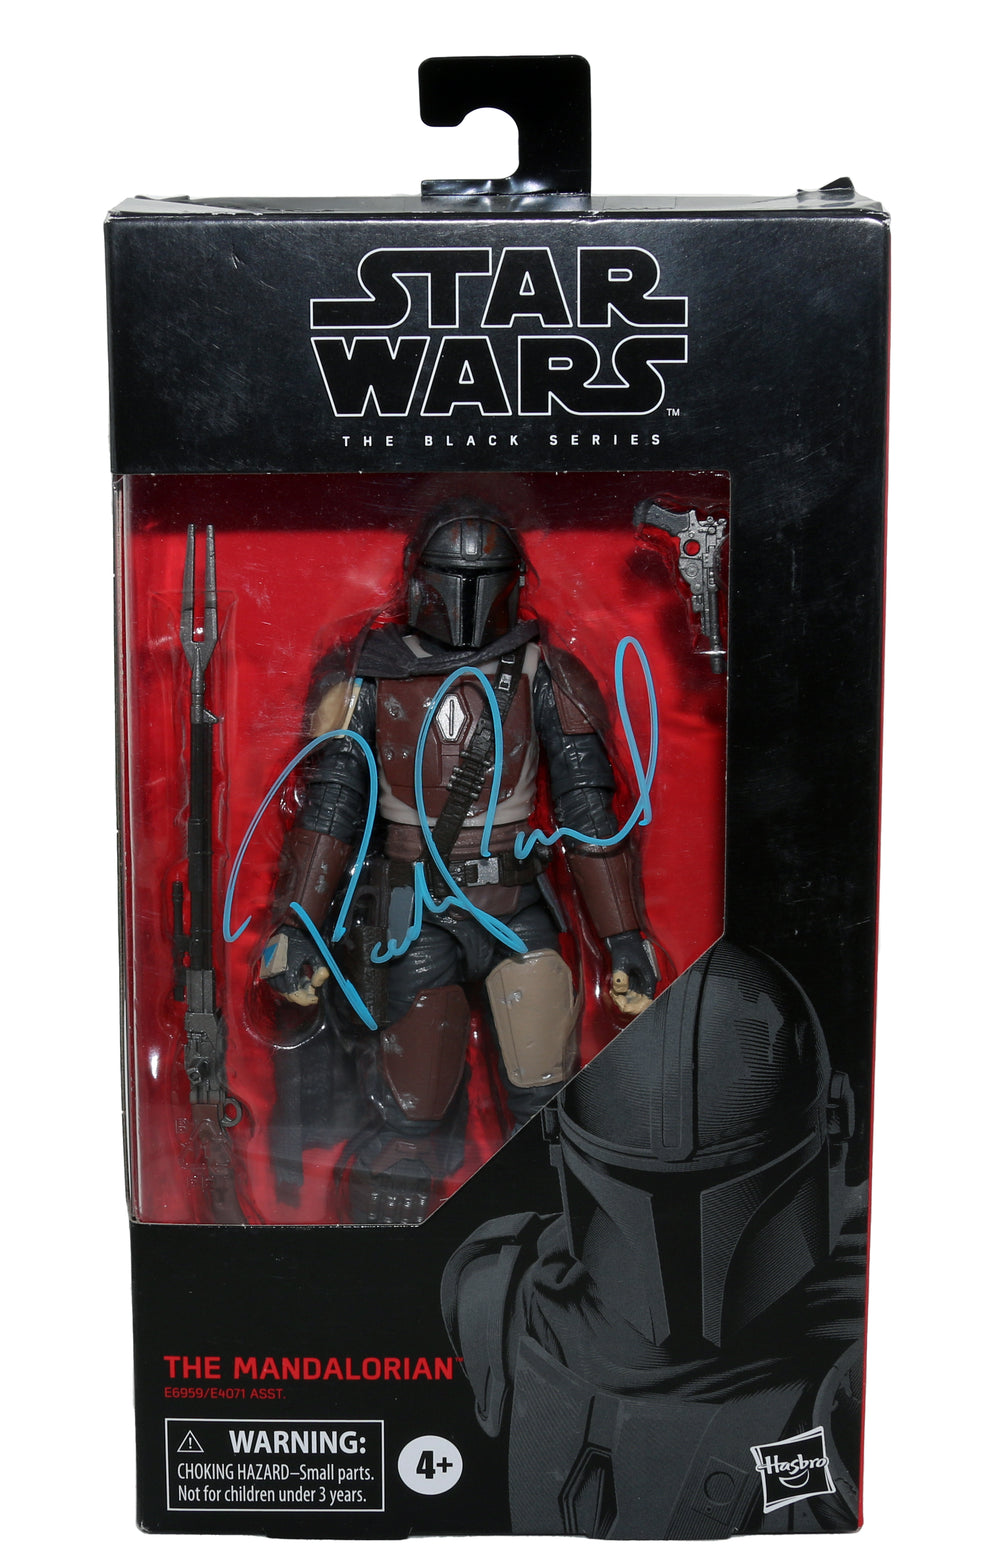 Pedro Pascal as the Mandalorian in Star Wars (Witnessed) Signed Black Series Figure